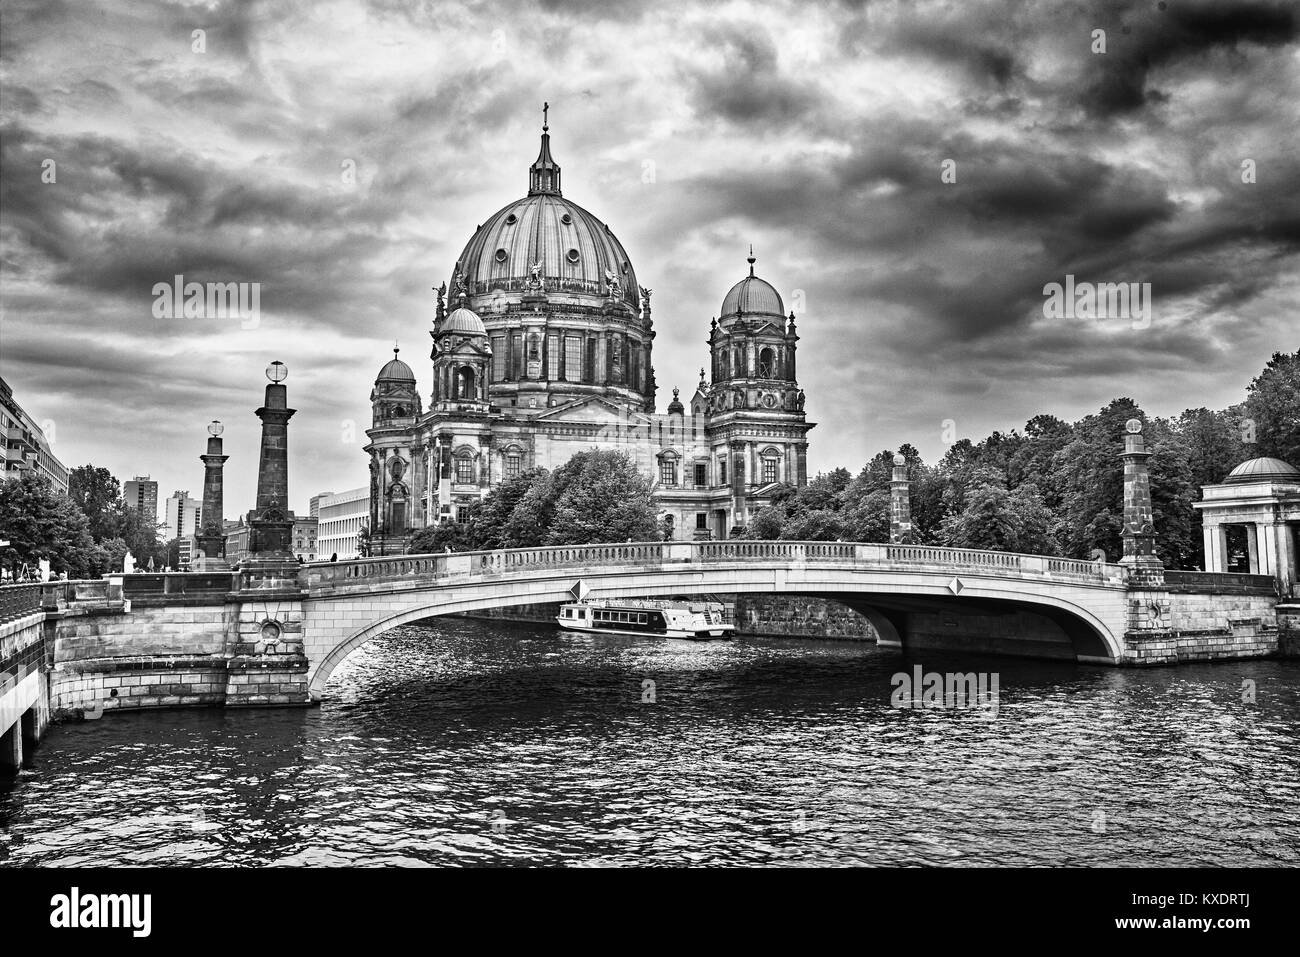 Berlin cathedral, Berliner Dom, suggestive winter atmosphere - black and white photography Stock Photo